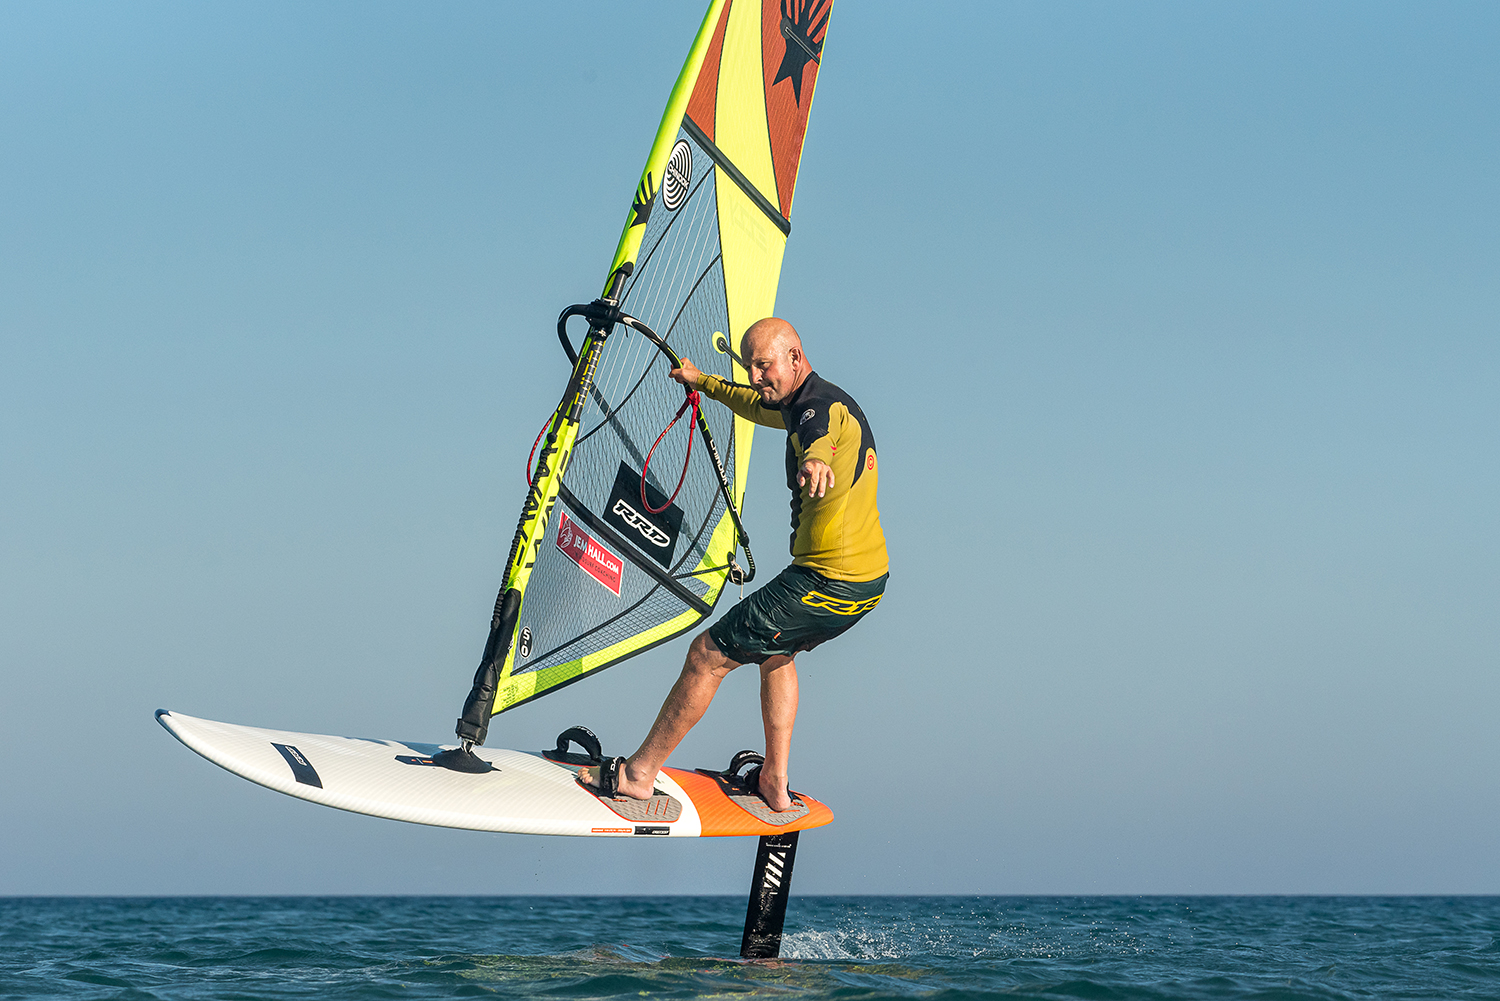 Top turn: Keep the sail open, bring it forward, look upwind, keep the ride height stable with your back foot pressure and carve off your heels. You can do many of these turns, they are fun and really build your skills.